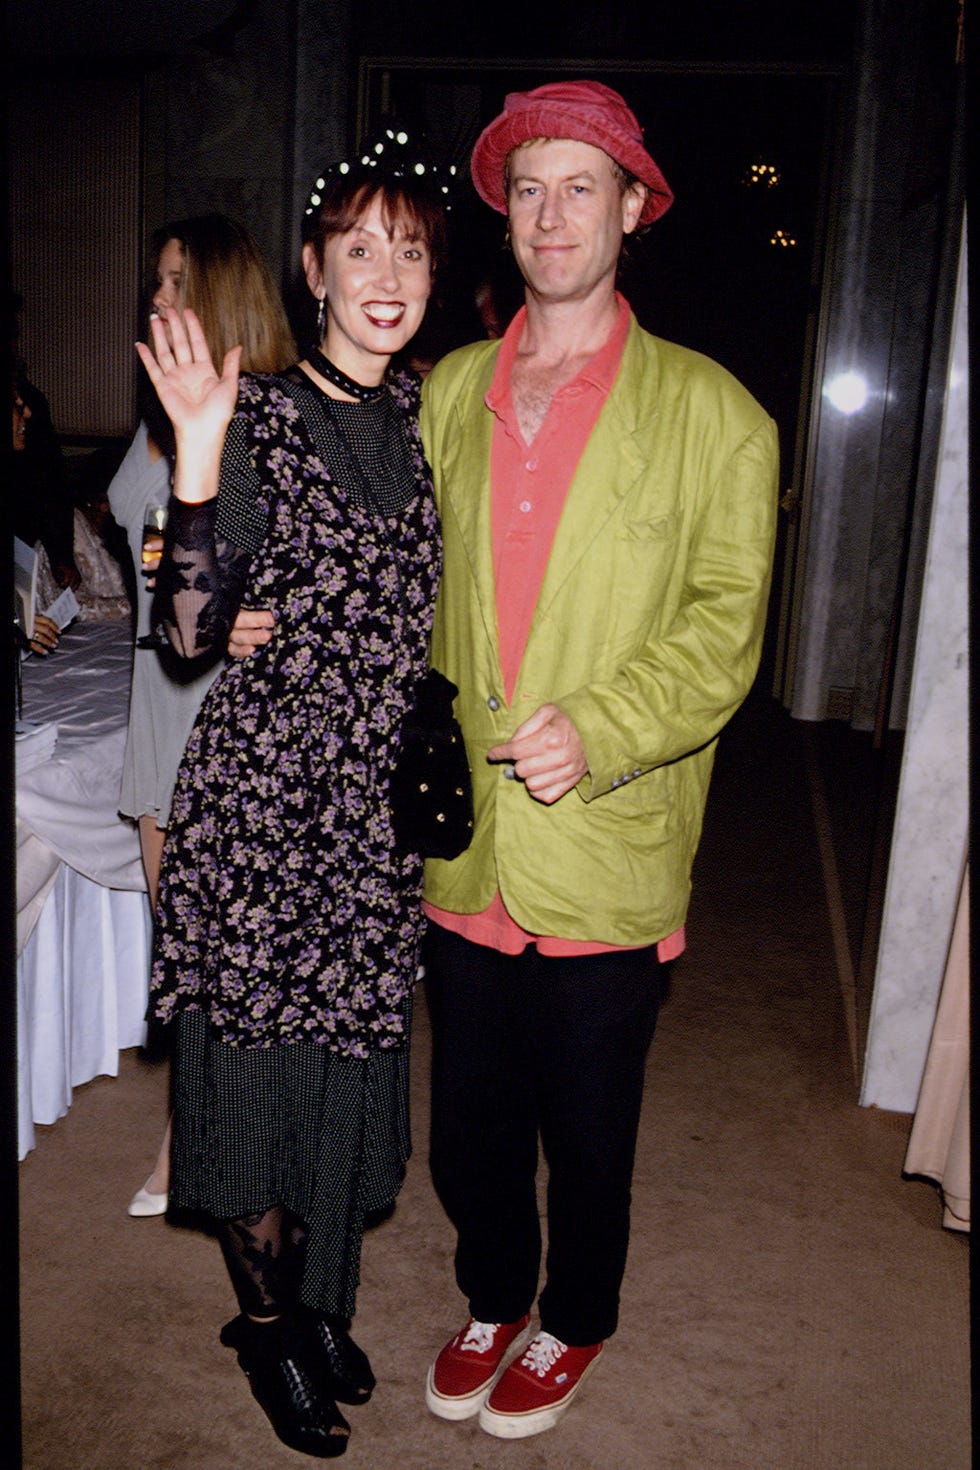 shelley duvall and dan gilroy stand together and smile at the camera, she waves one hand as they hold each other around the waist